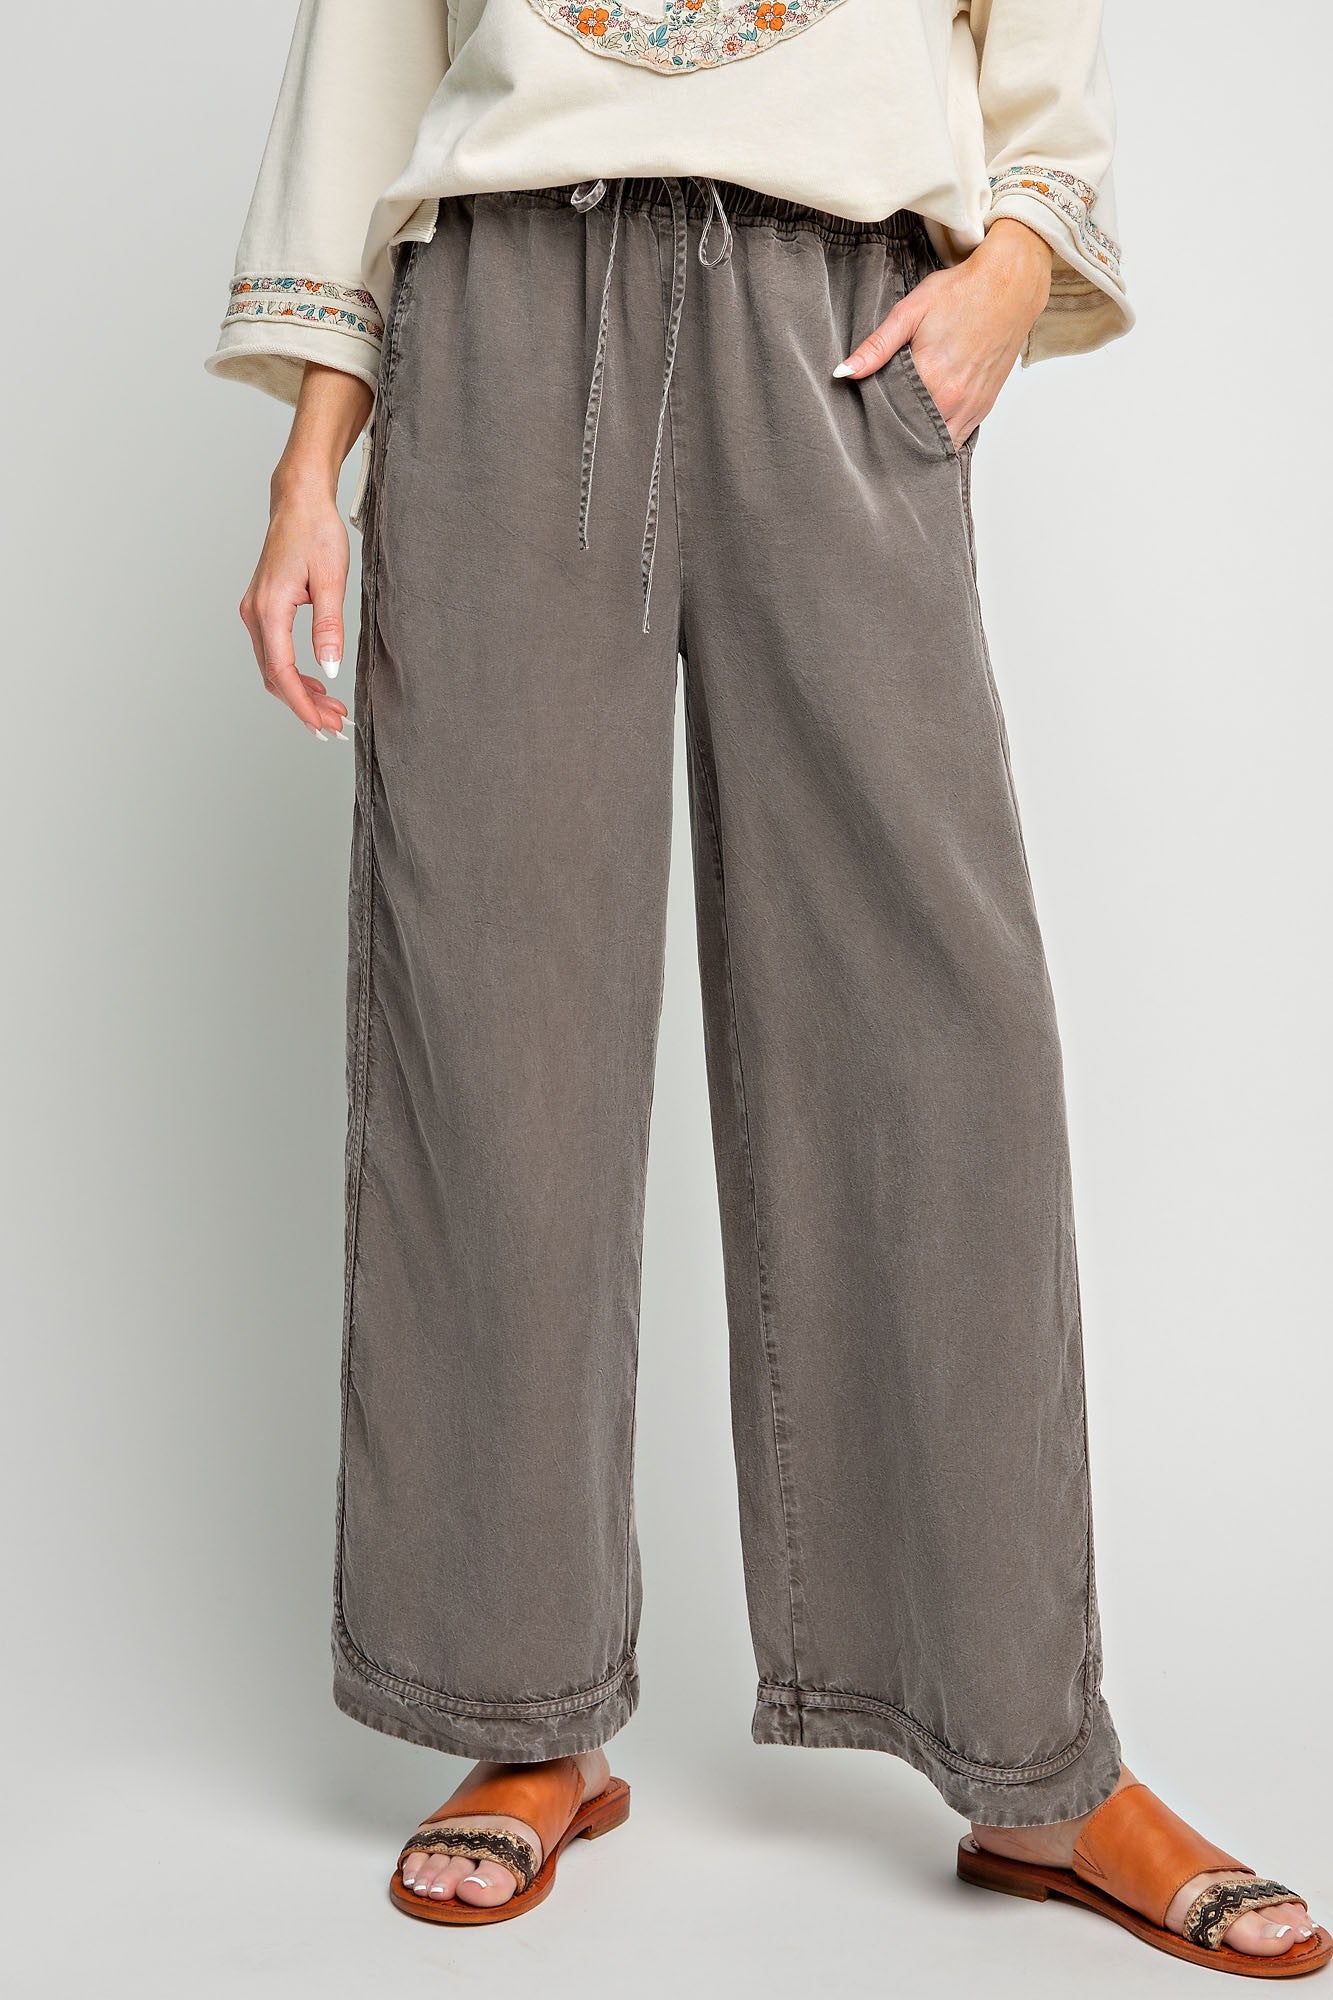 Mineral Washed Soft Twill Wide Leg Pants